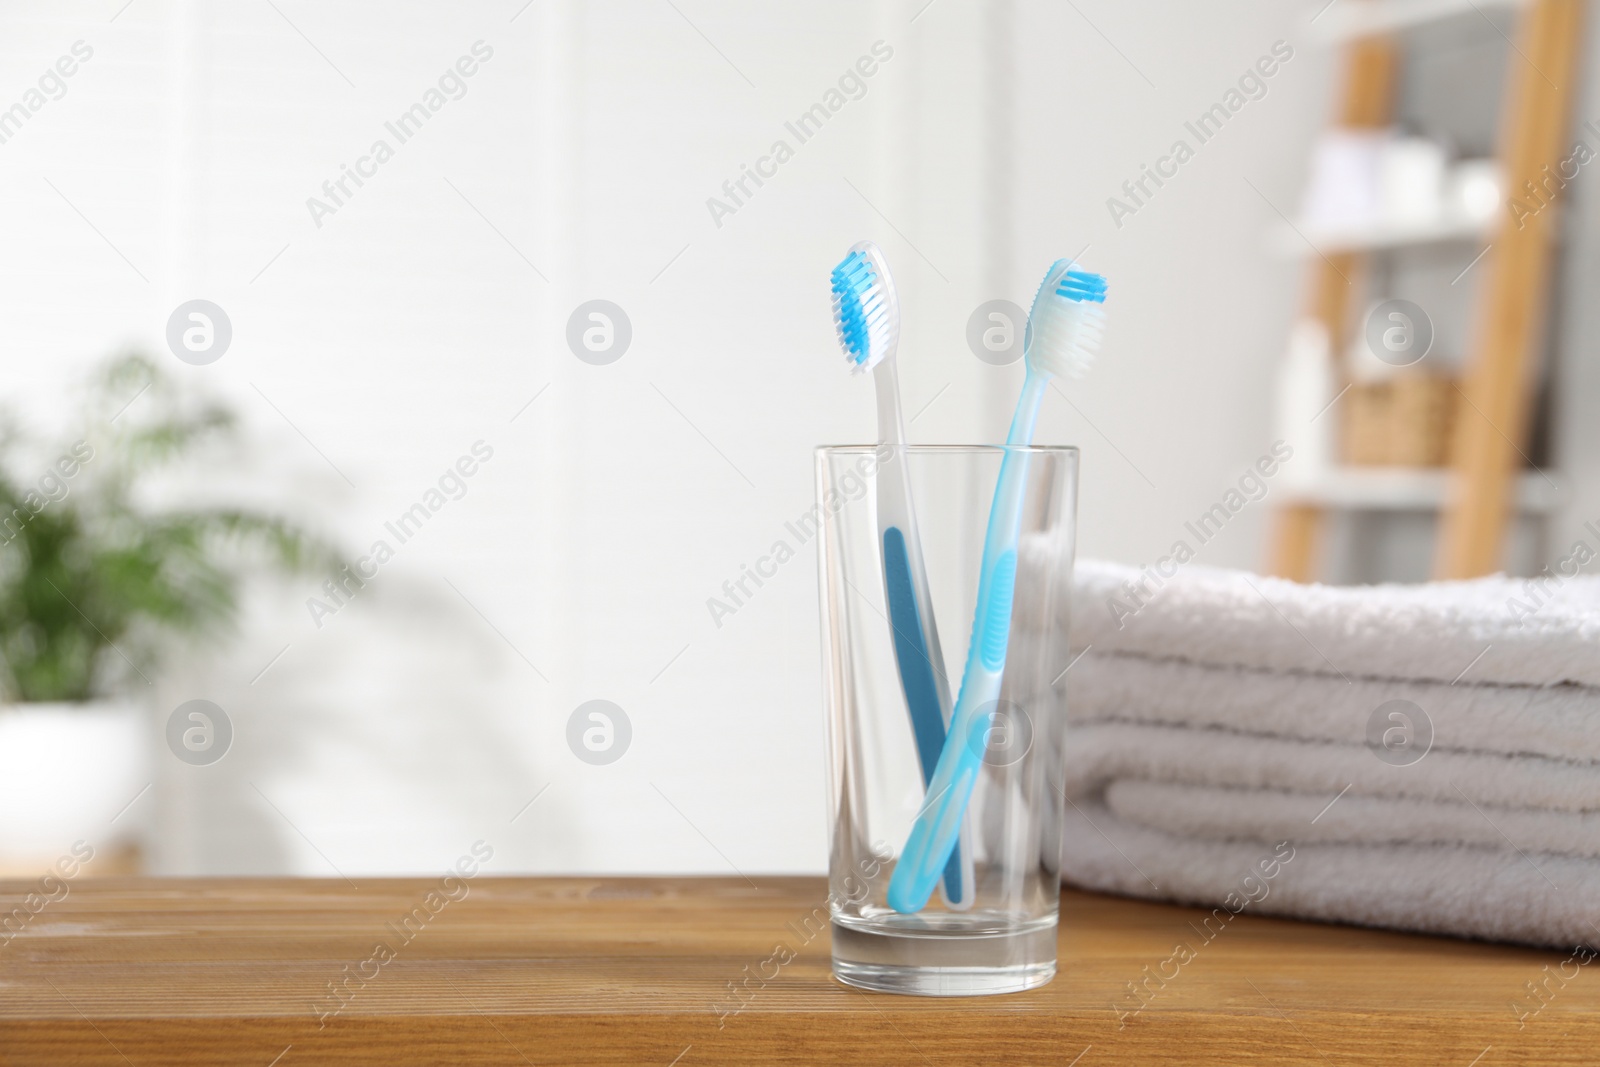 Photo of Plastic toothbrushes and towels on wooden table in bathroom, space for text